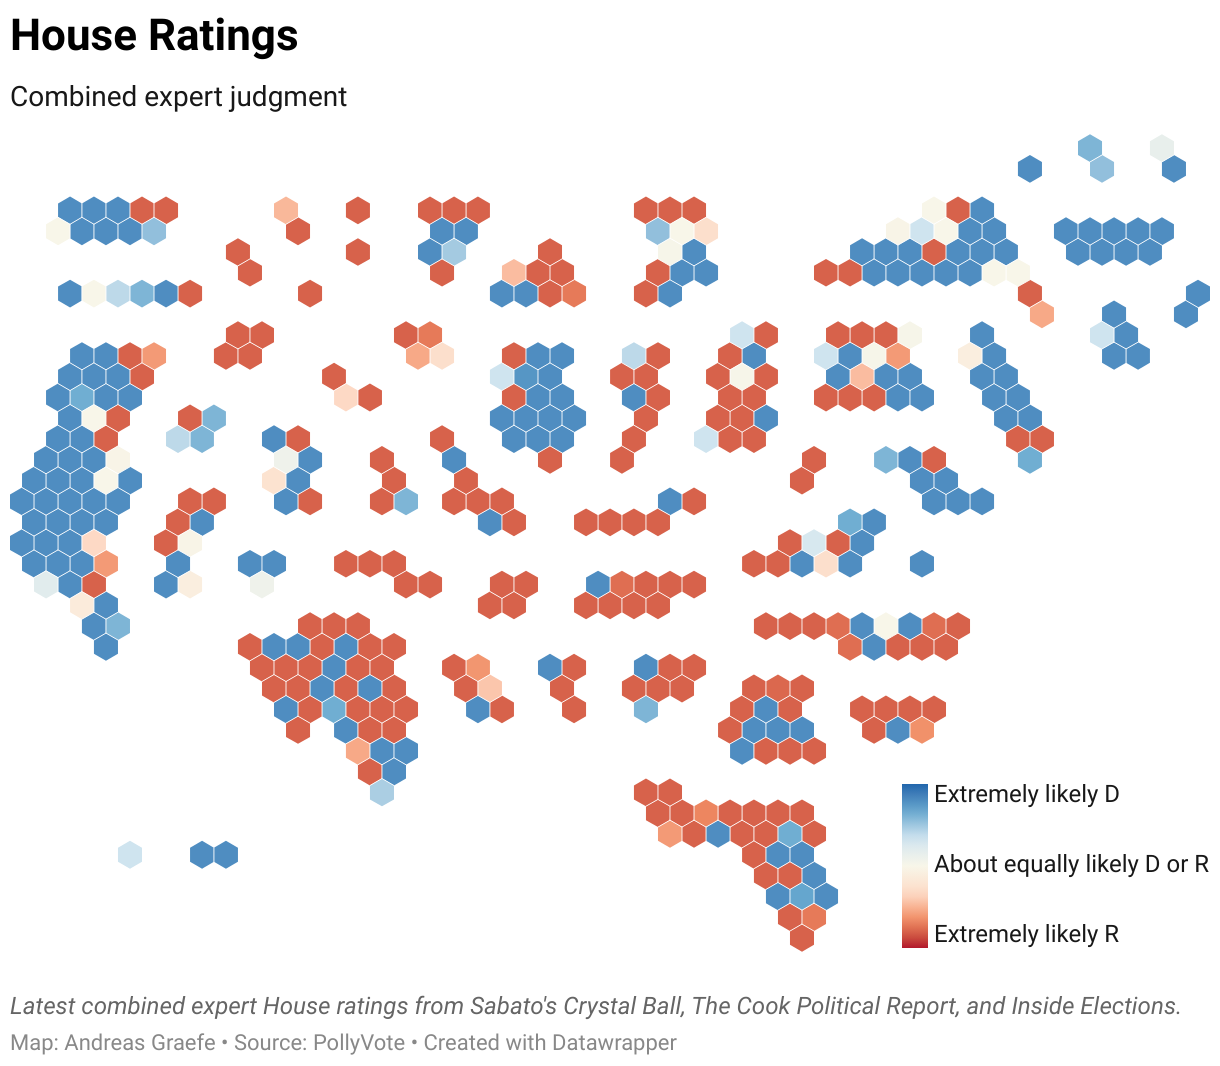 Map of latest combined expert House ratings from Sabato's Crystal Ball, The Cook Political Report, and Inside Elections.